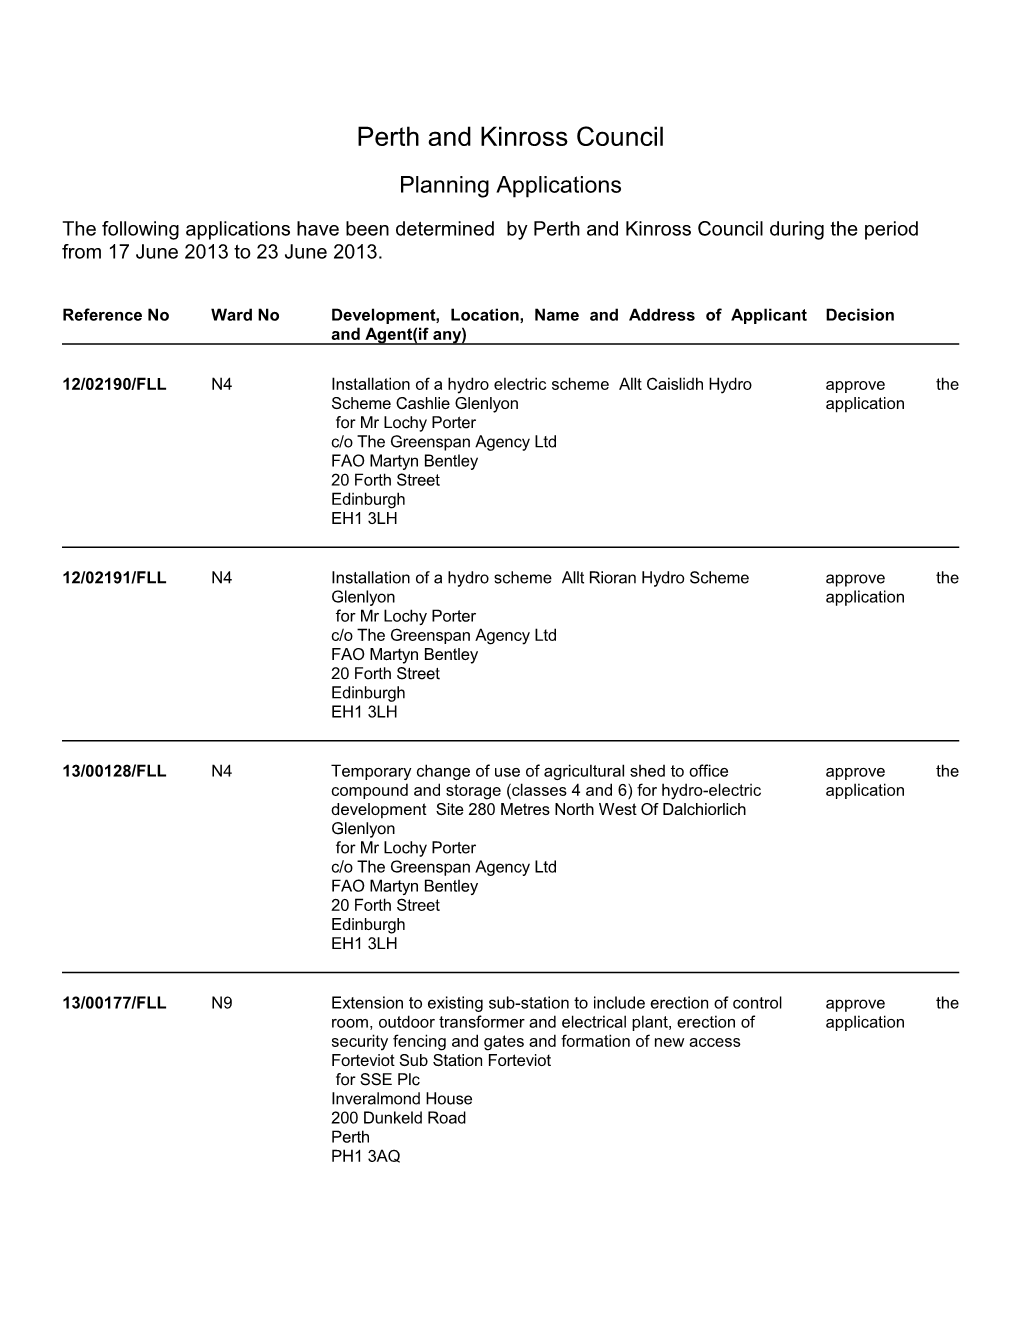 Planning Applications Received Week Ending 21St January 2013